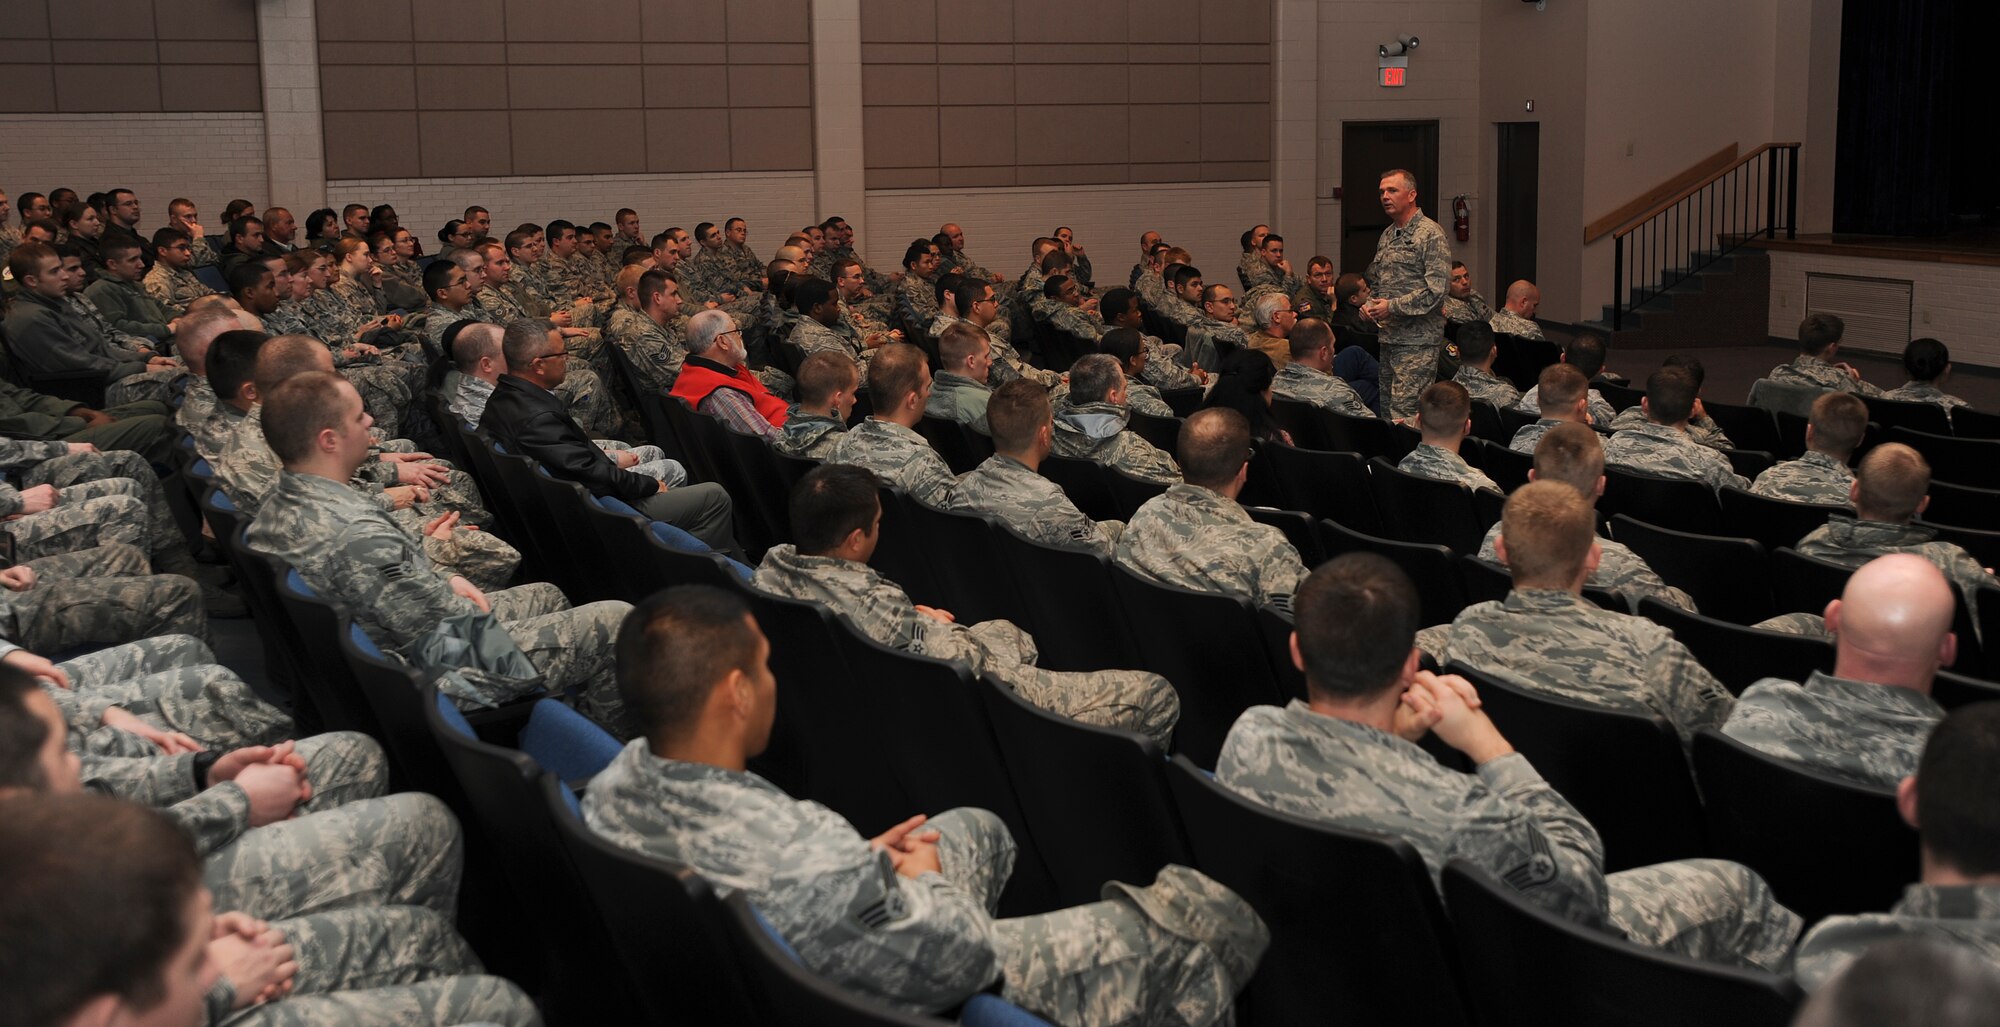 Col. Ricky Rupp, 22nd Air Refueling Wing commander, speaks at a commander’s call in the base theater Dec. 13, 2011, McConnell Air Force Base, Kan.  Commander’s calls are used to distribute Air Force level information, recognize outstanding wing performances and answer Airman’s questions.  (U.S. Air Force photo/Airman 1st Class Jose L. Leon)